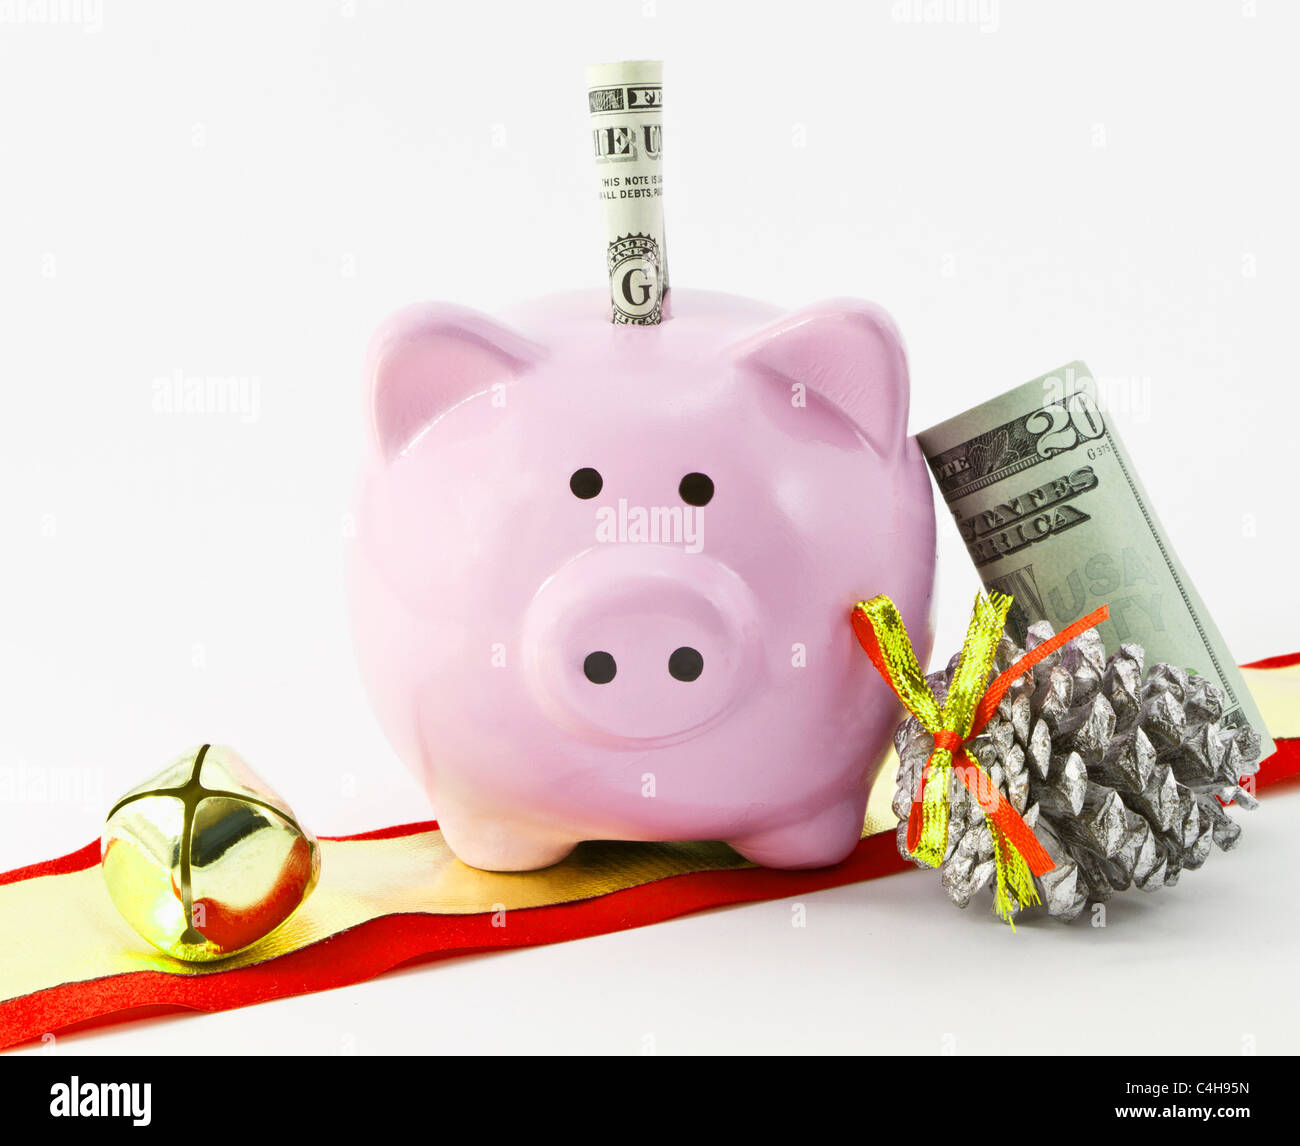 Pink bank holds currency and is placed with holiday items Stock Photo